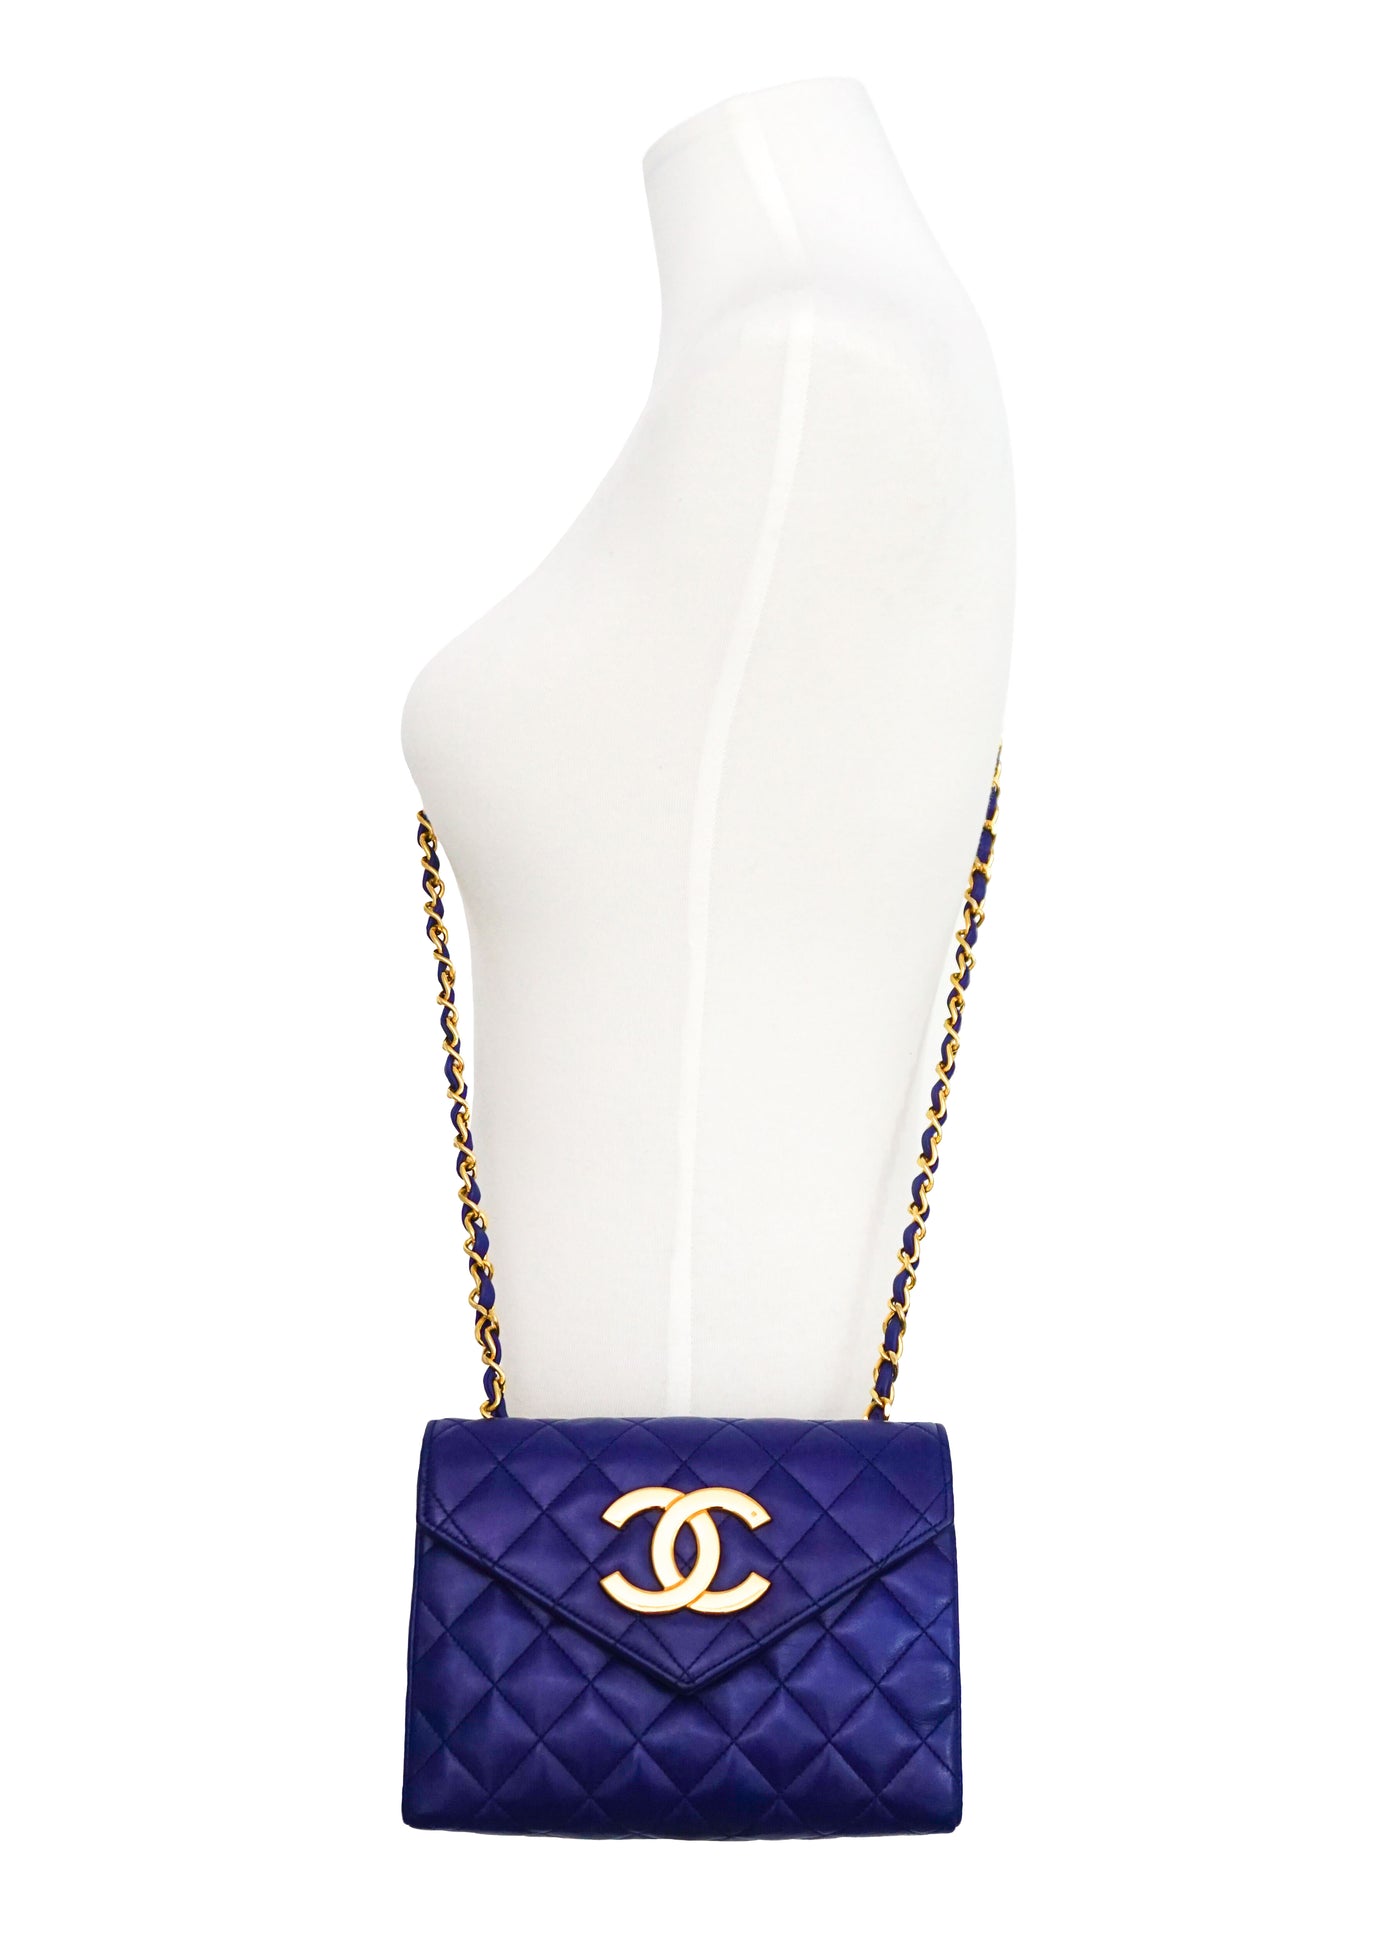 Chanel Royal Blue Quilted Lambskin Mini Classic Coco Flap Bag